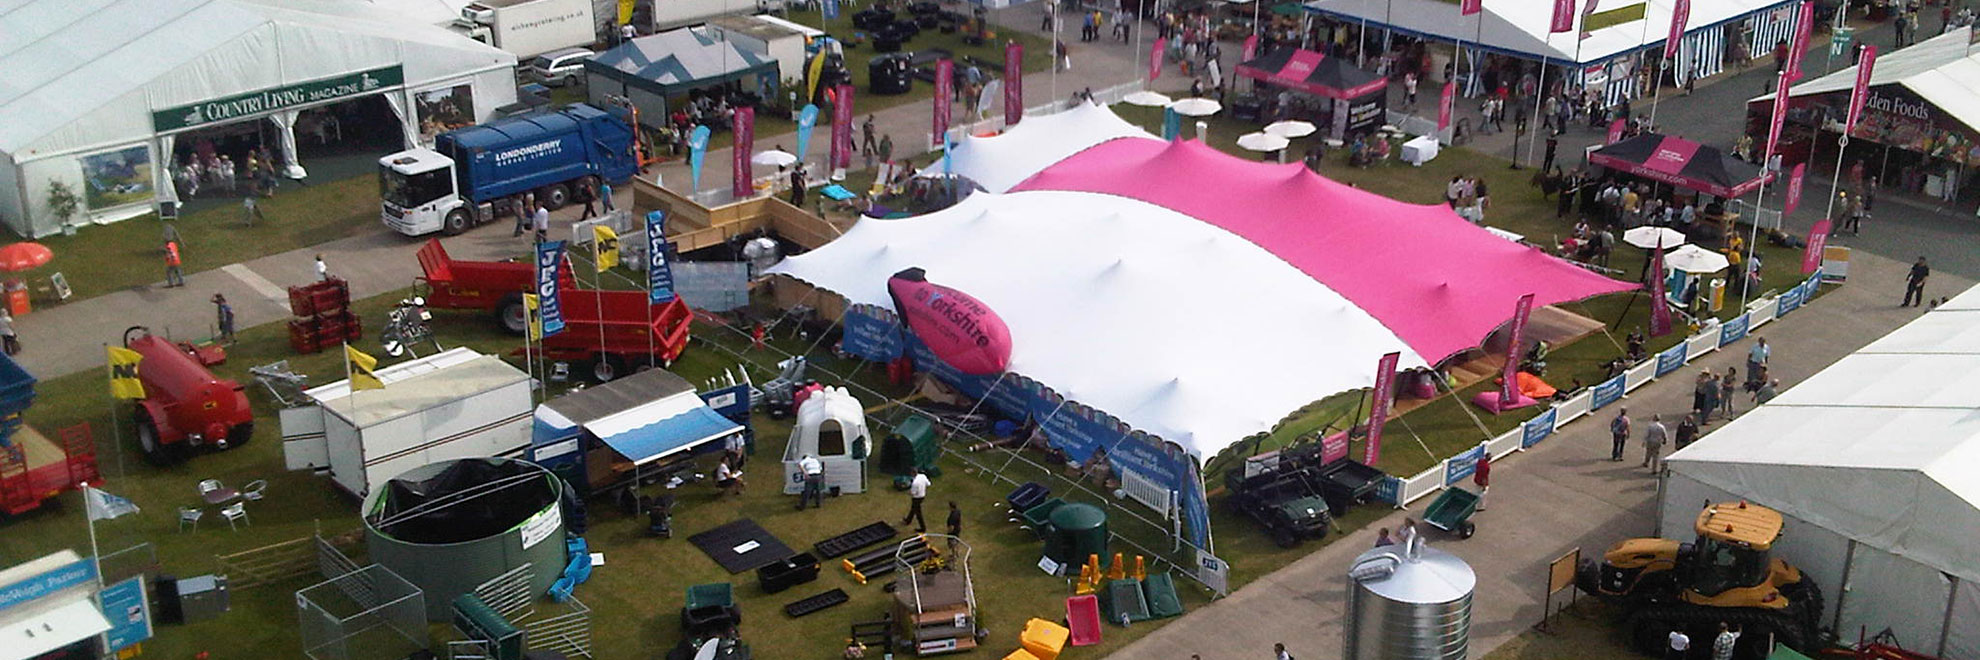 Pink and White Stretch tents